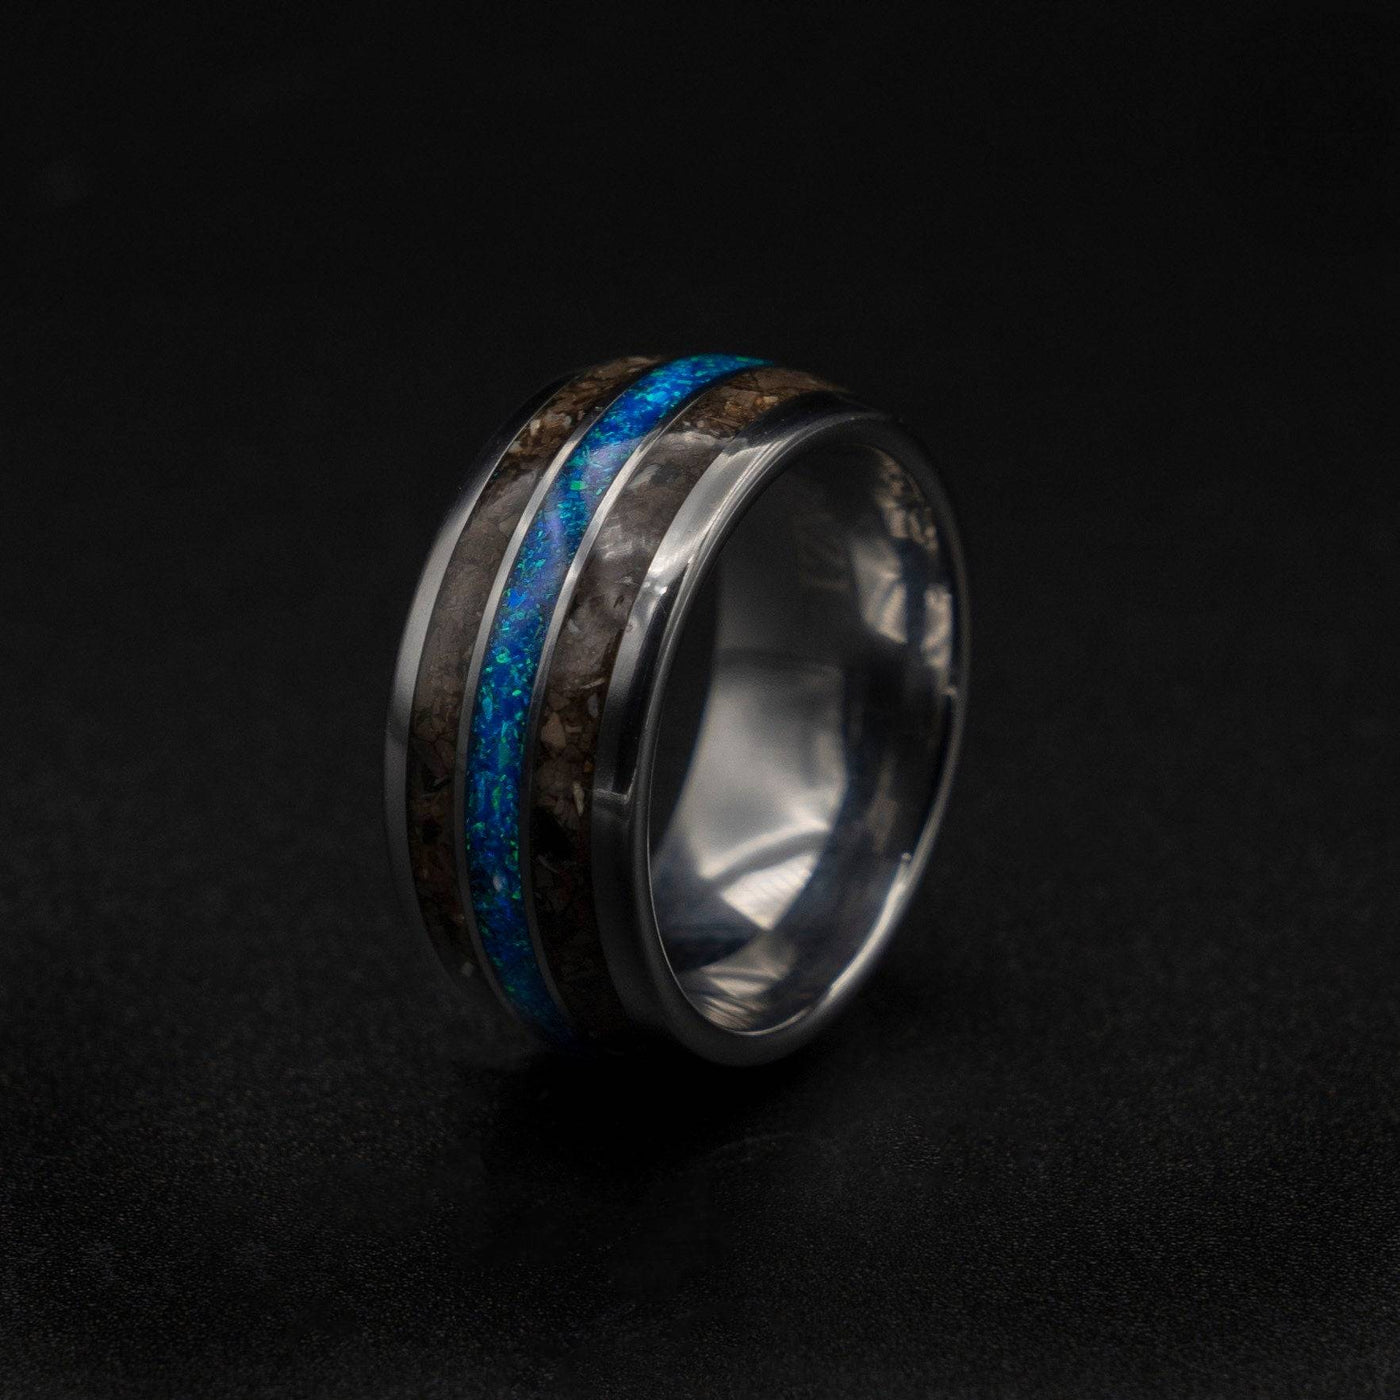 Blue Opal Tungsten Ring with T Rex Bone Fossil